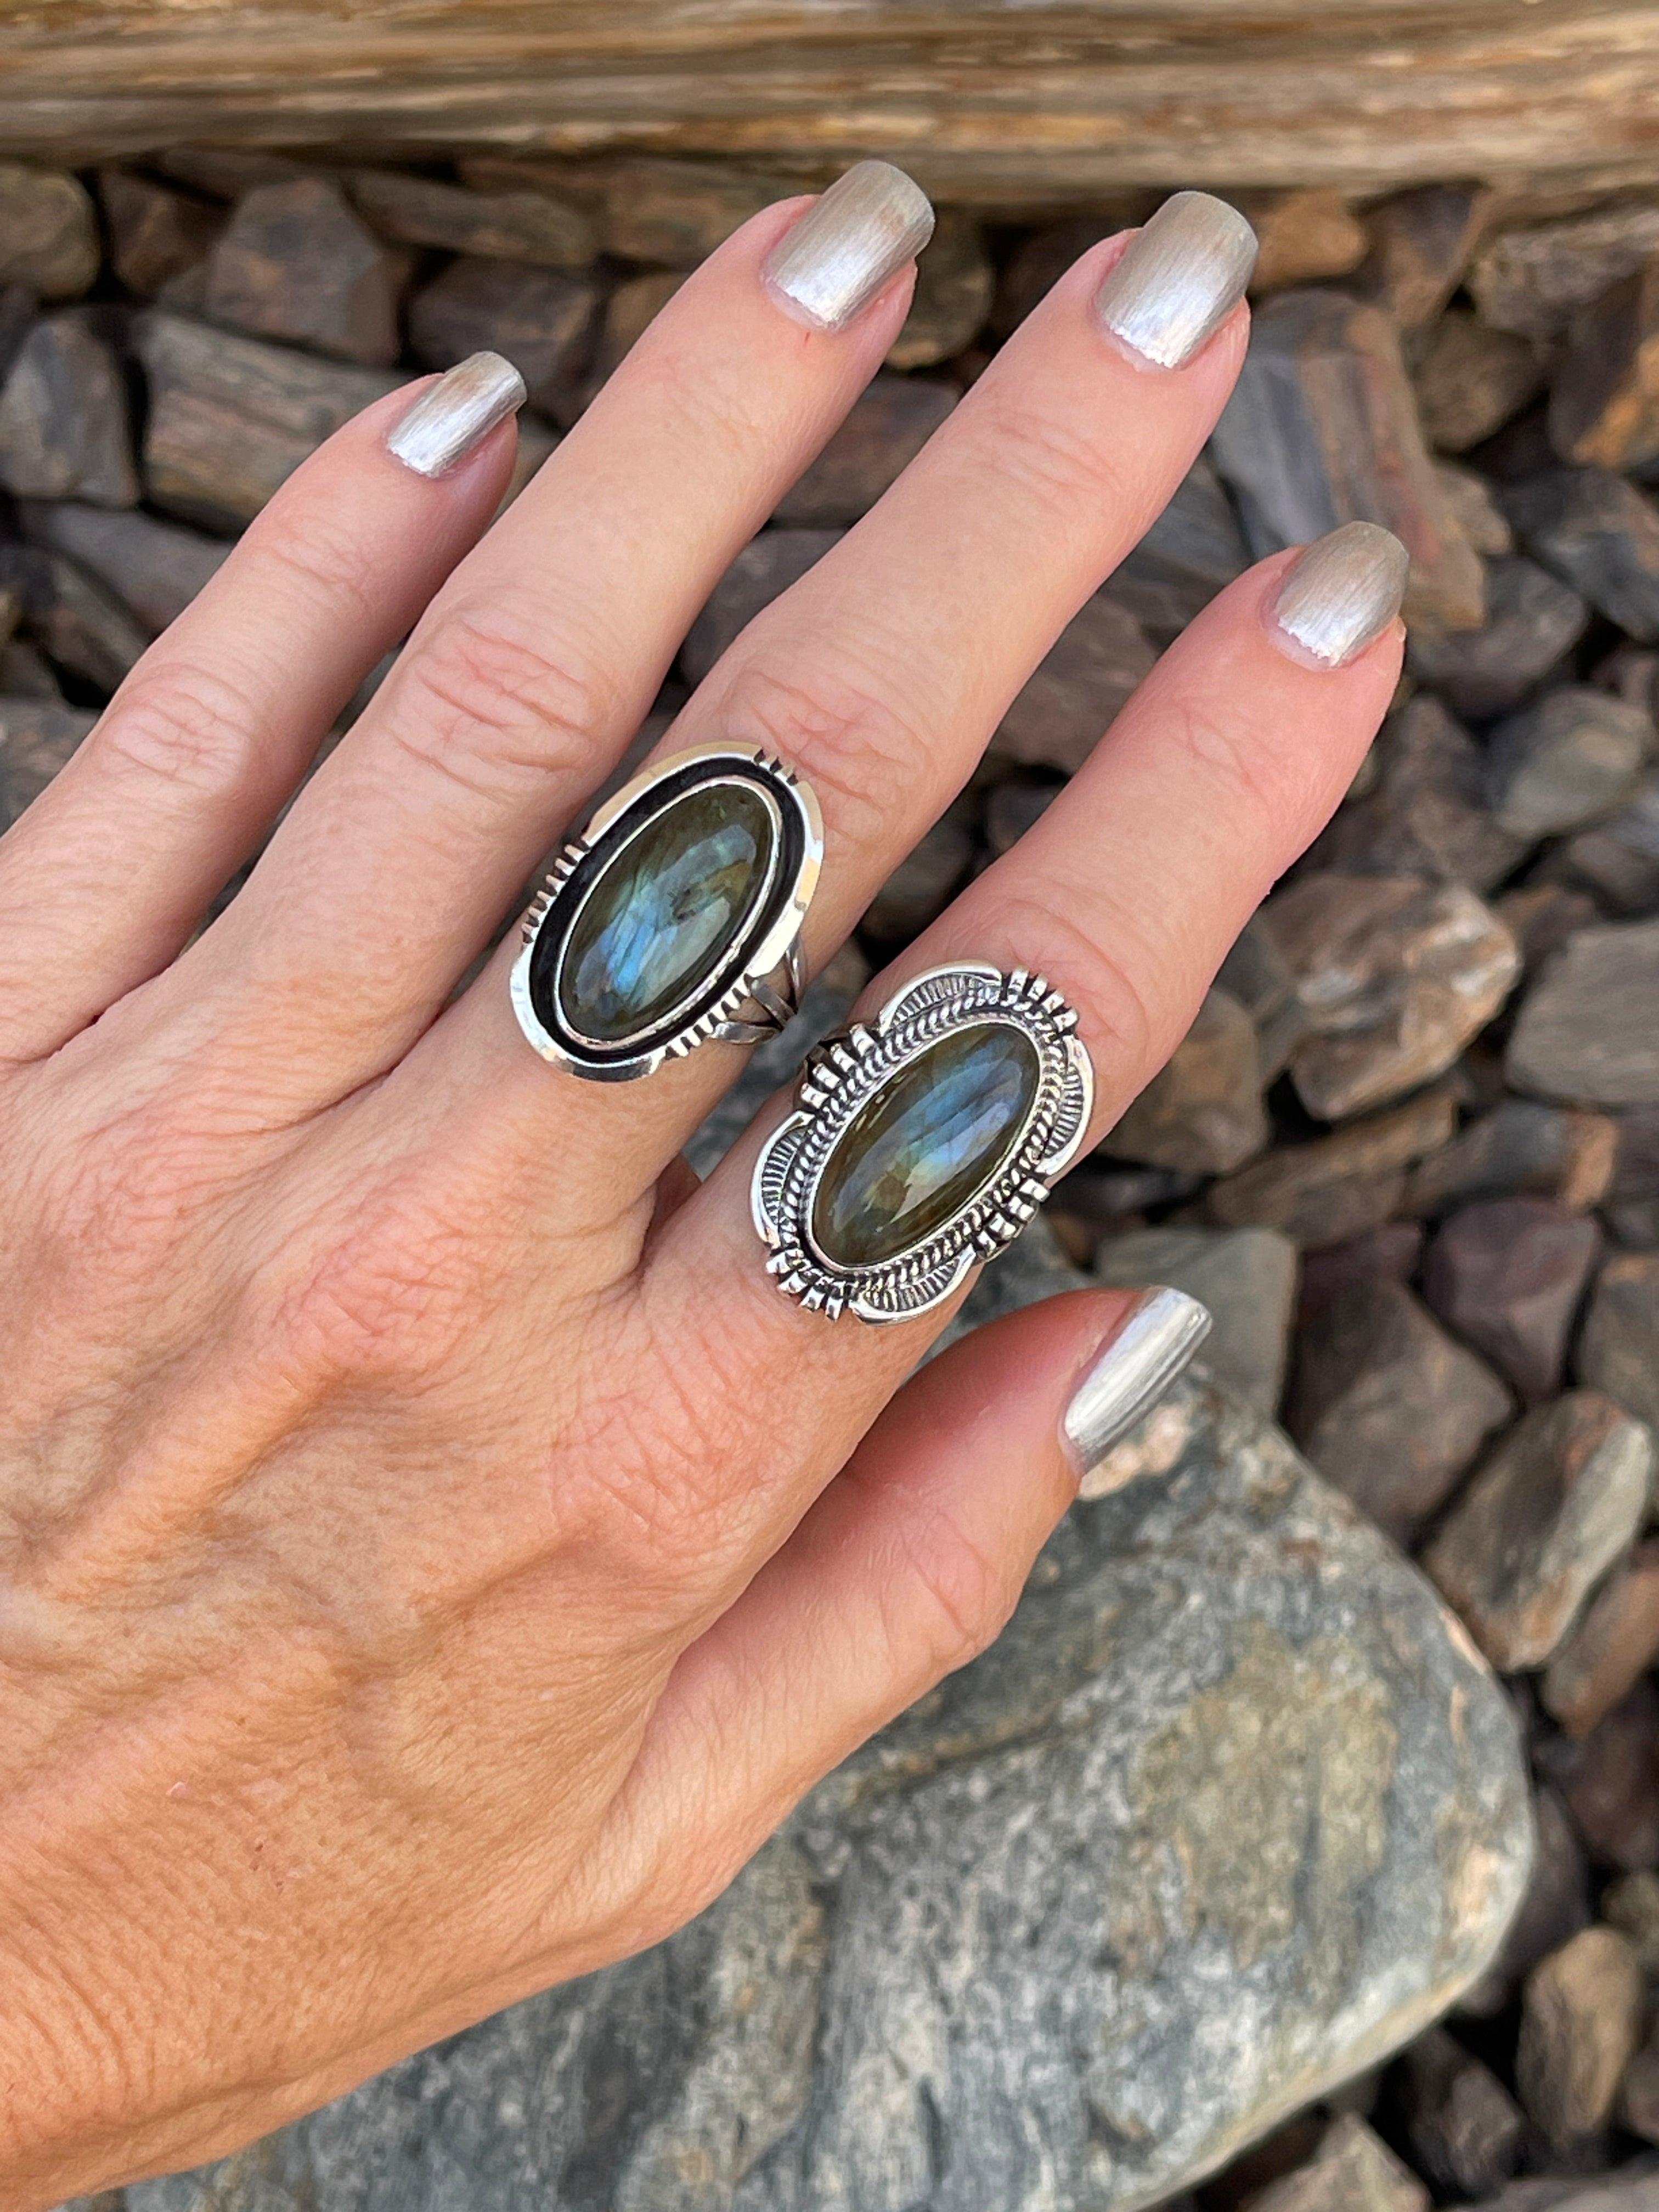 Handmade Solid Sterling Silver Labradorite Ring with Shadow Box Trim  - Size 6 1/2